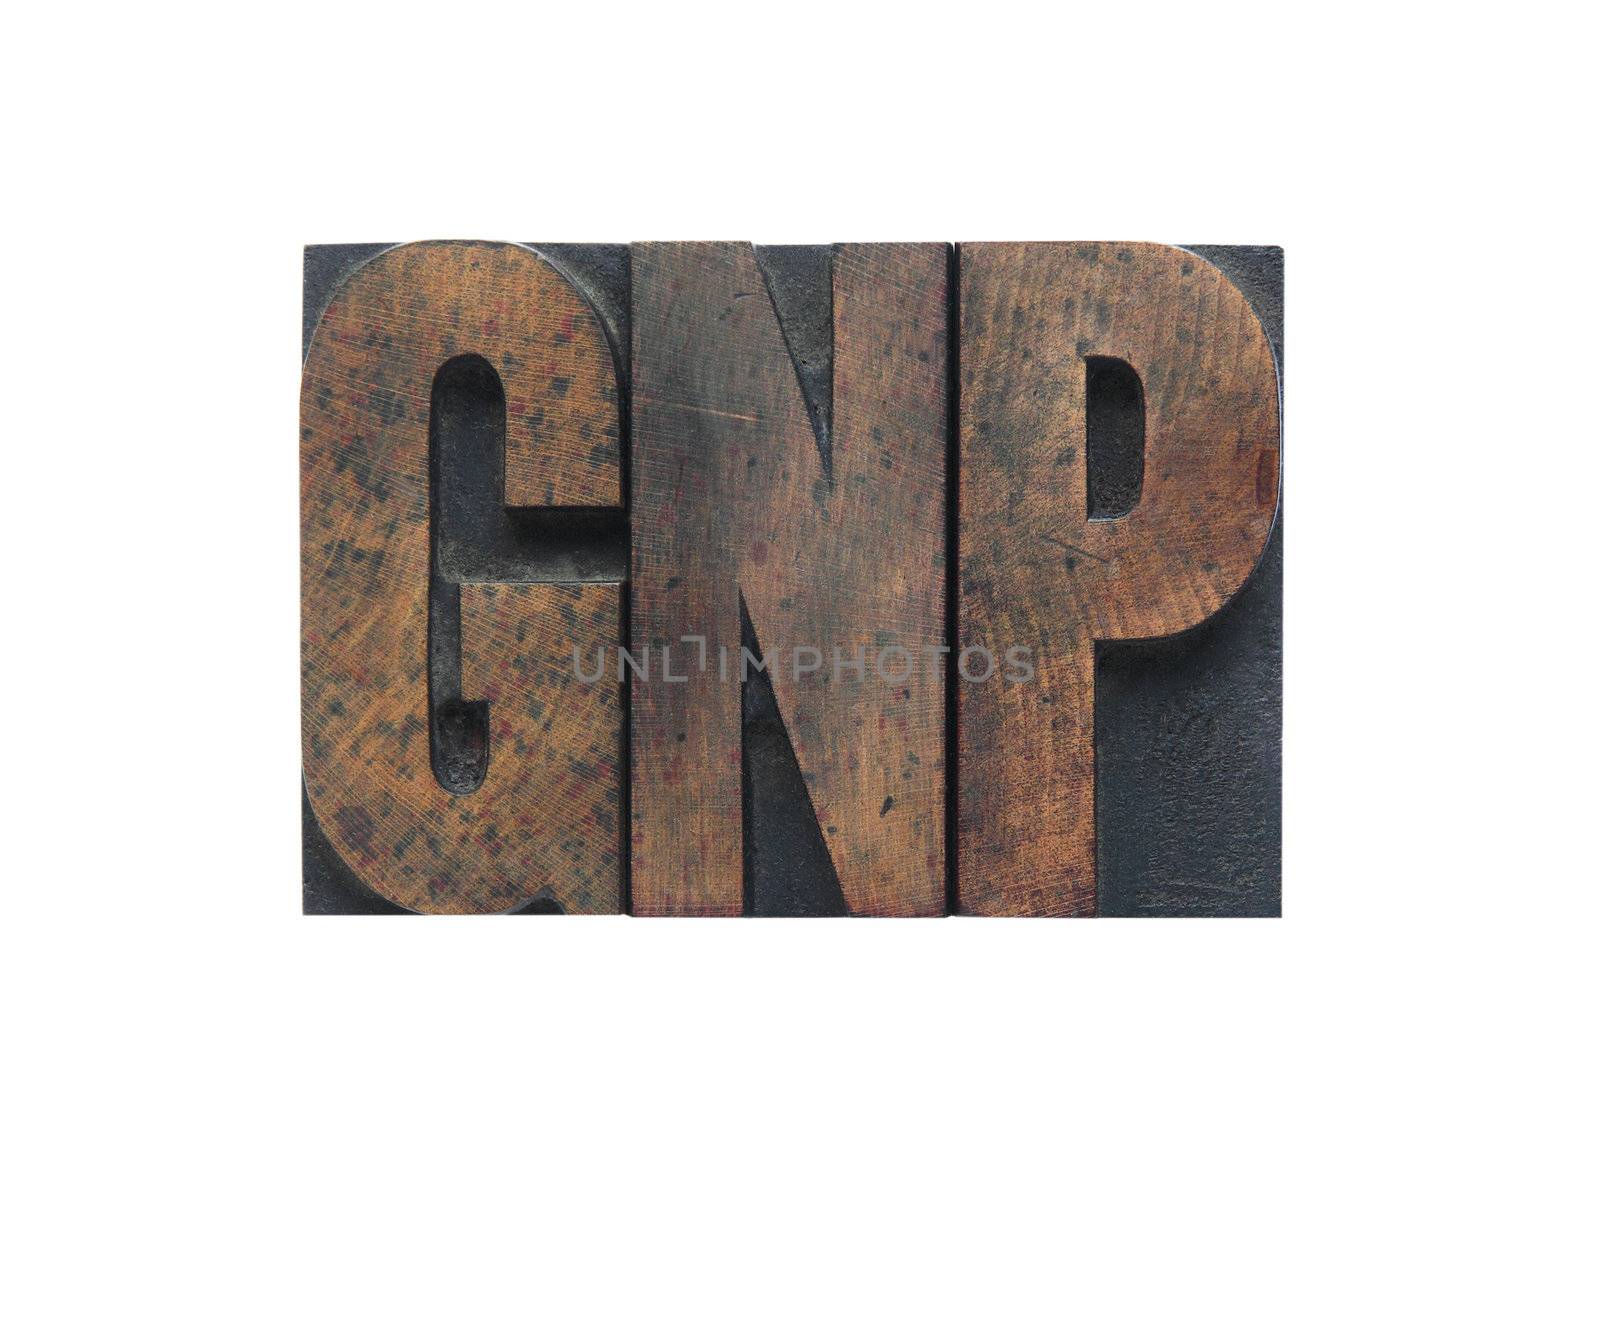 the term 'GNP' in old wood type